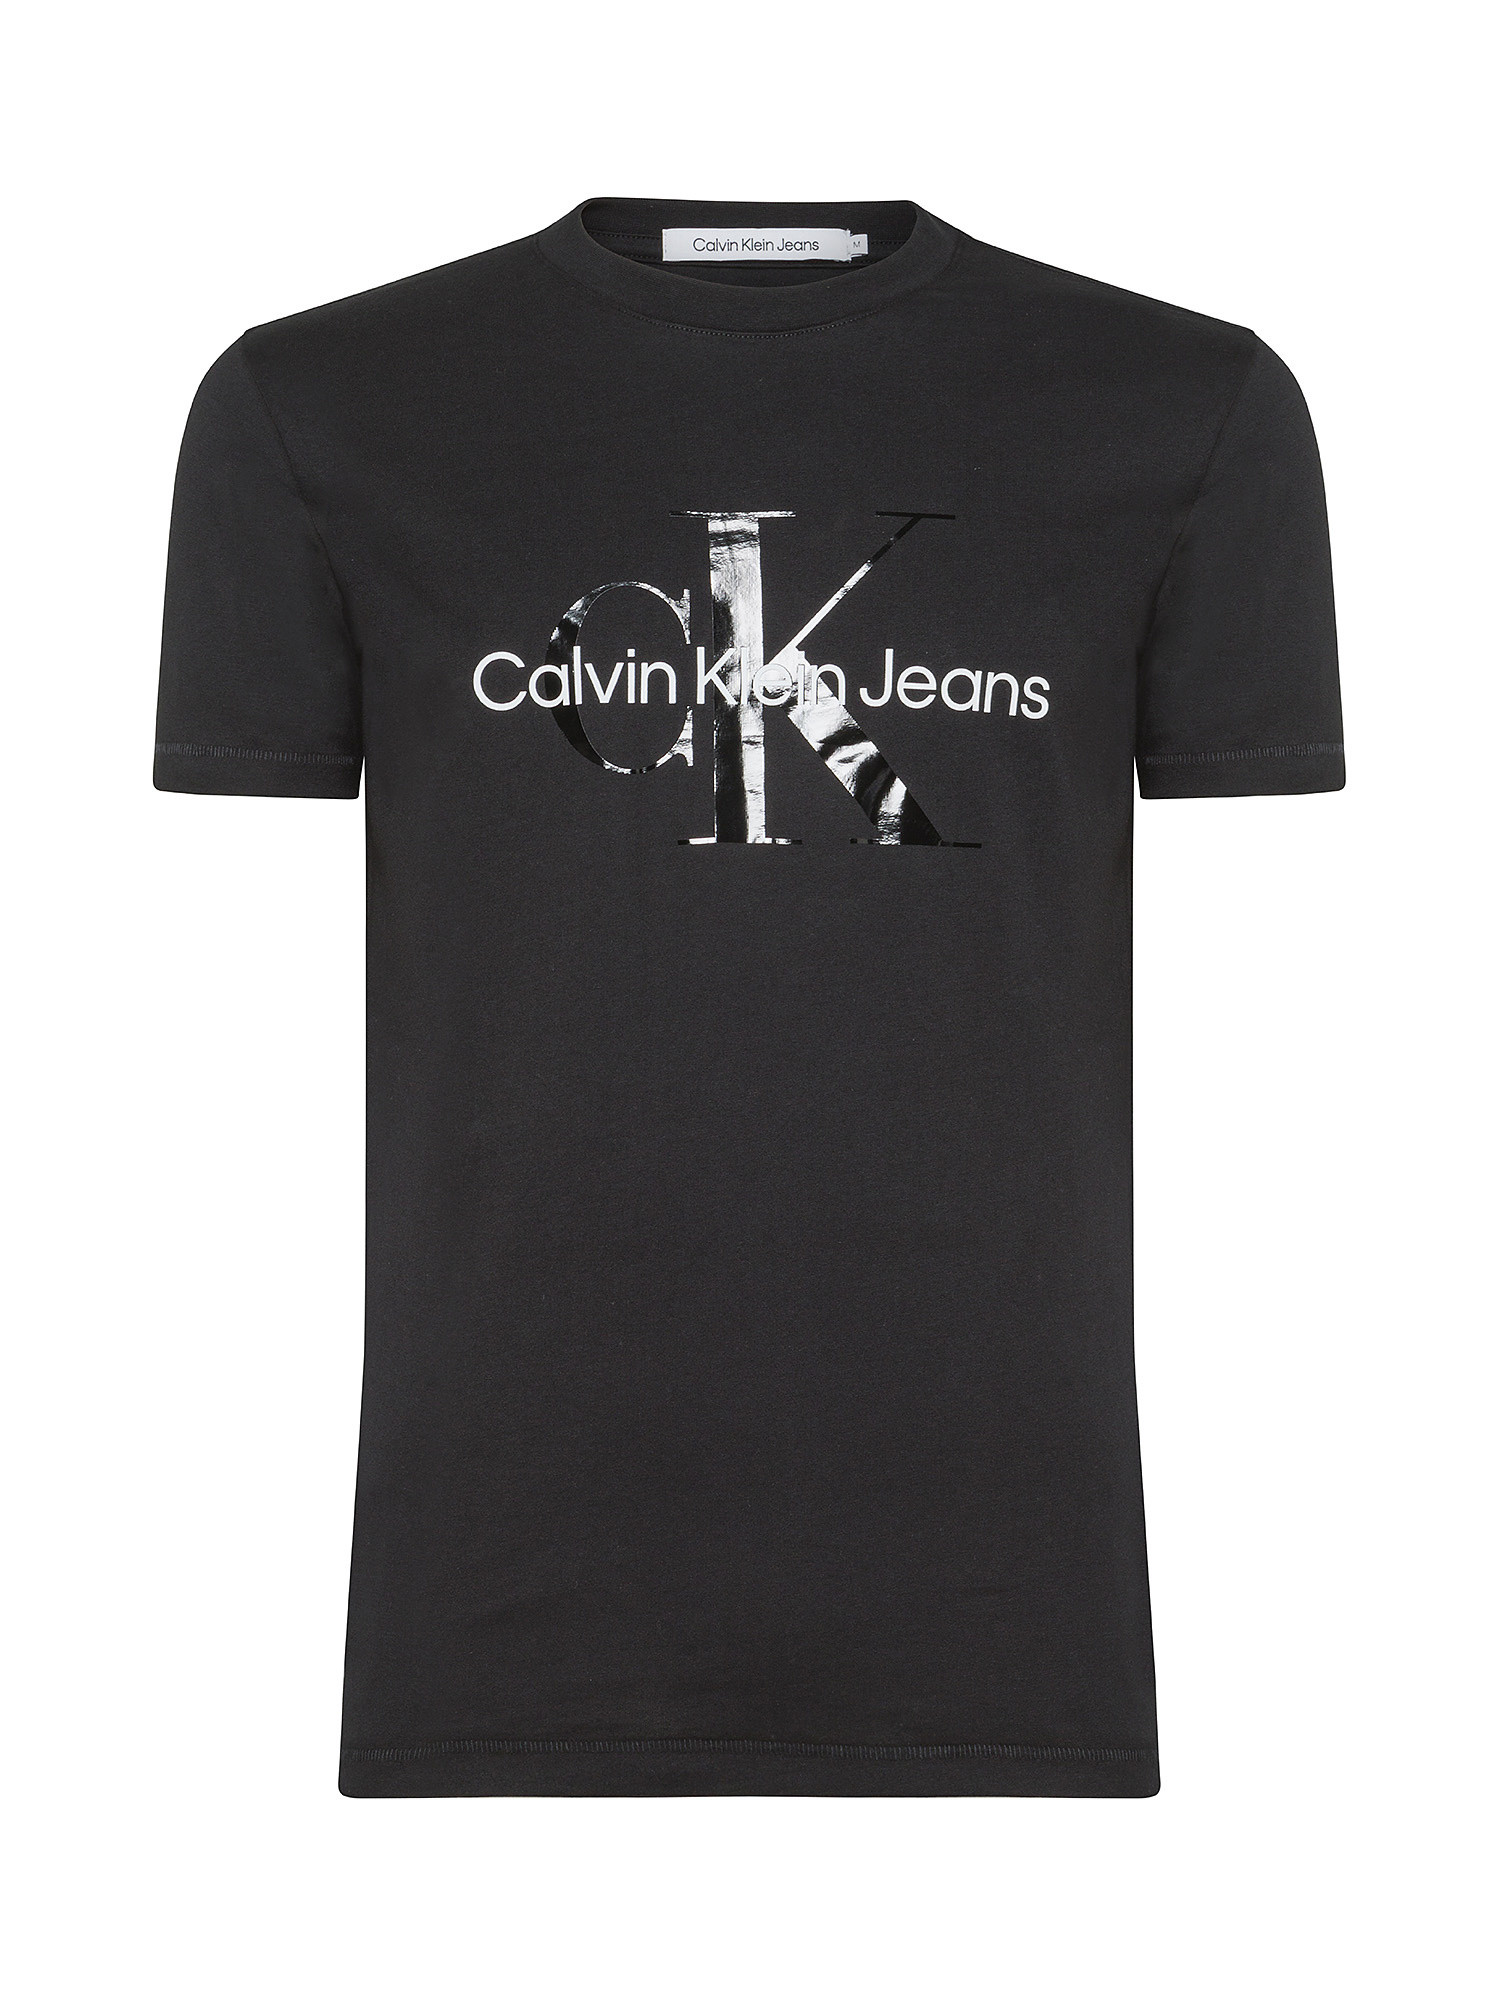 Calvin Klein Jeans -  T-shirt in cotone con logo, Nero, large image number 0